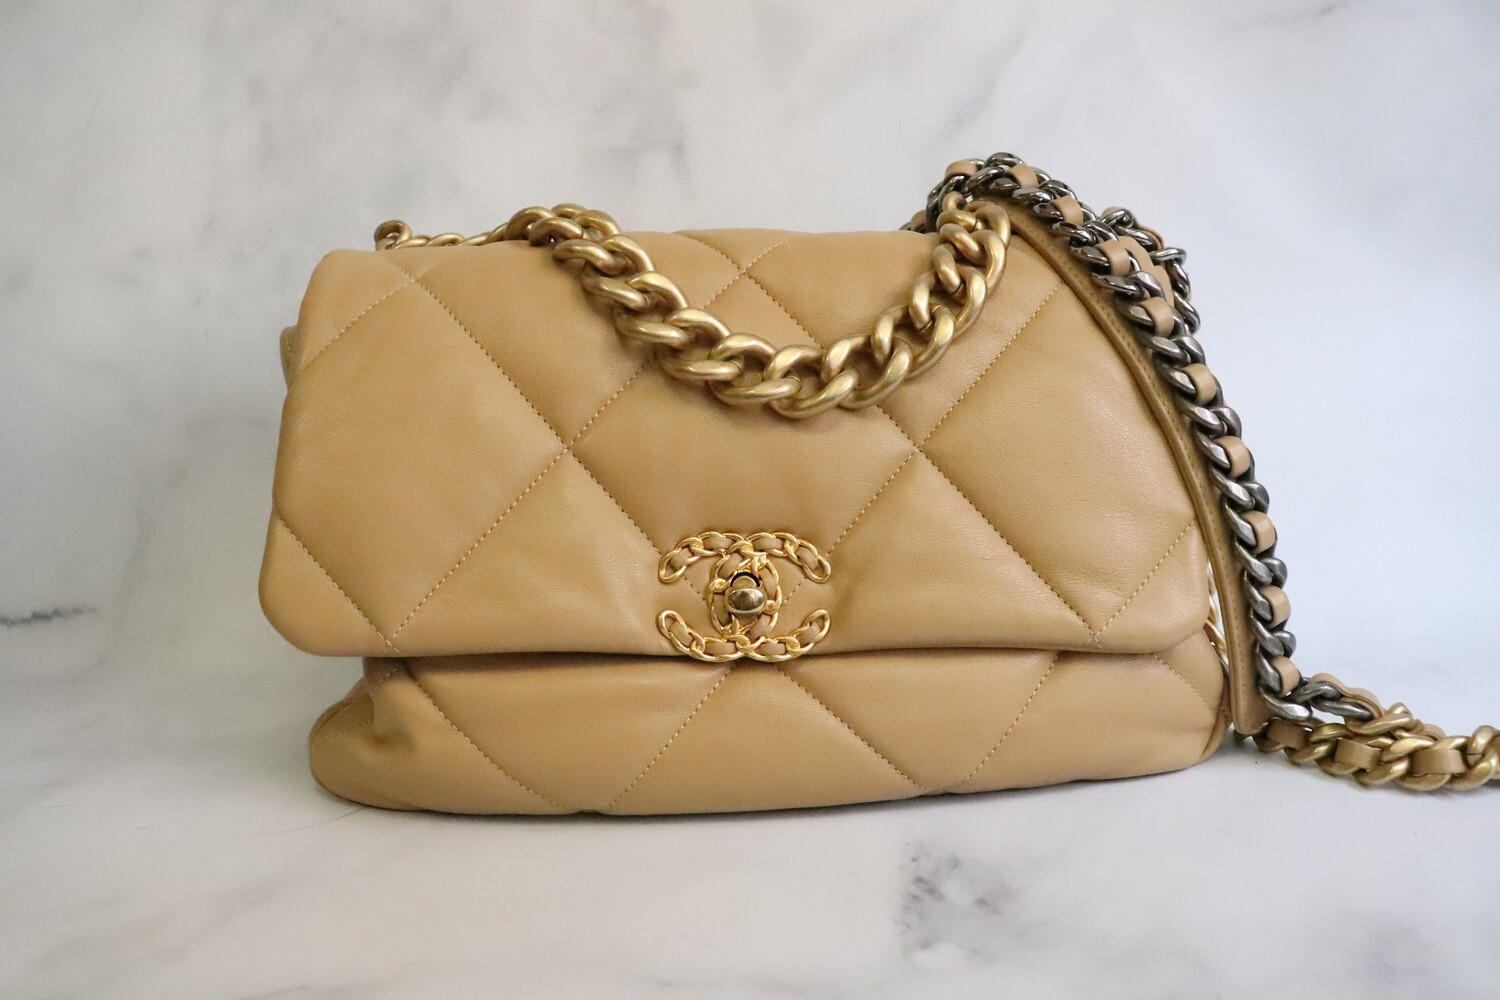 Chanel 19 Dark Beige Large (Jumbo) Middle Size, Preowned in Dustbag